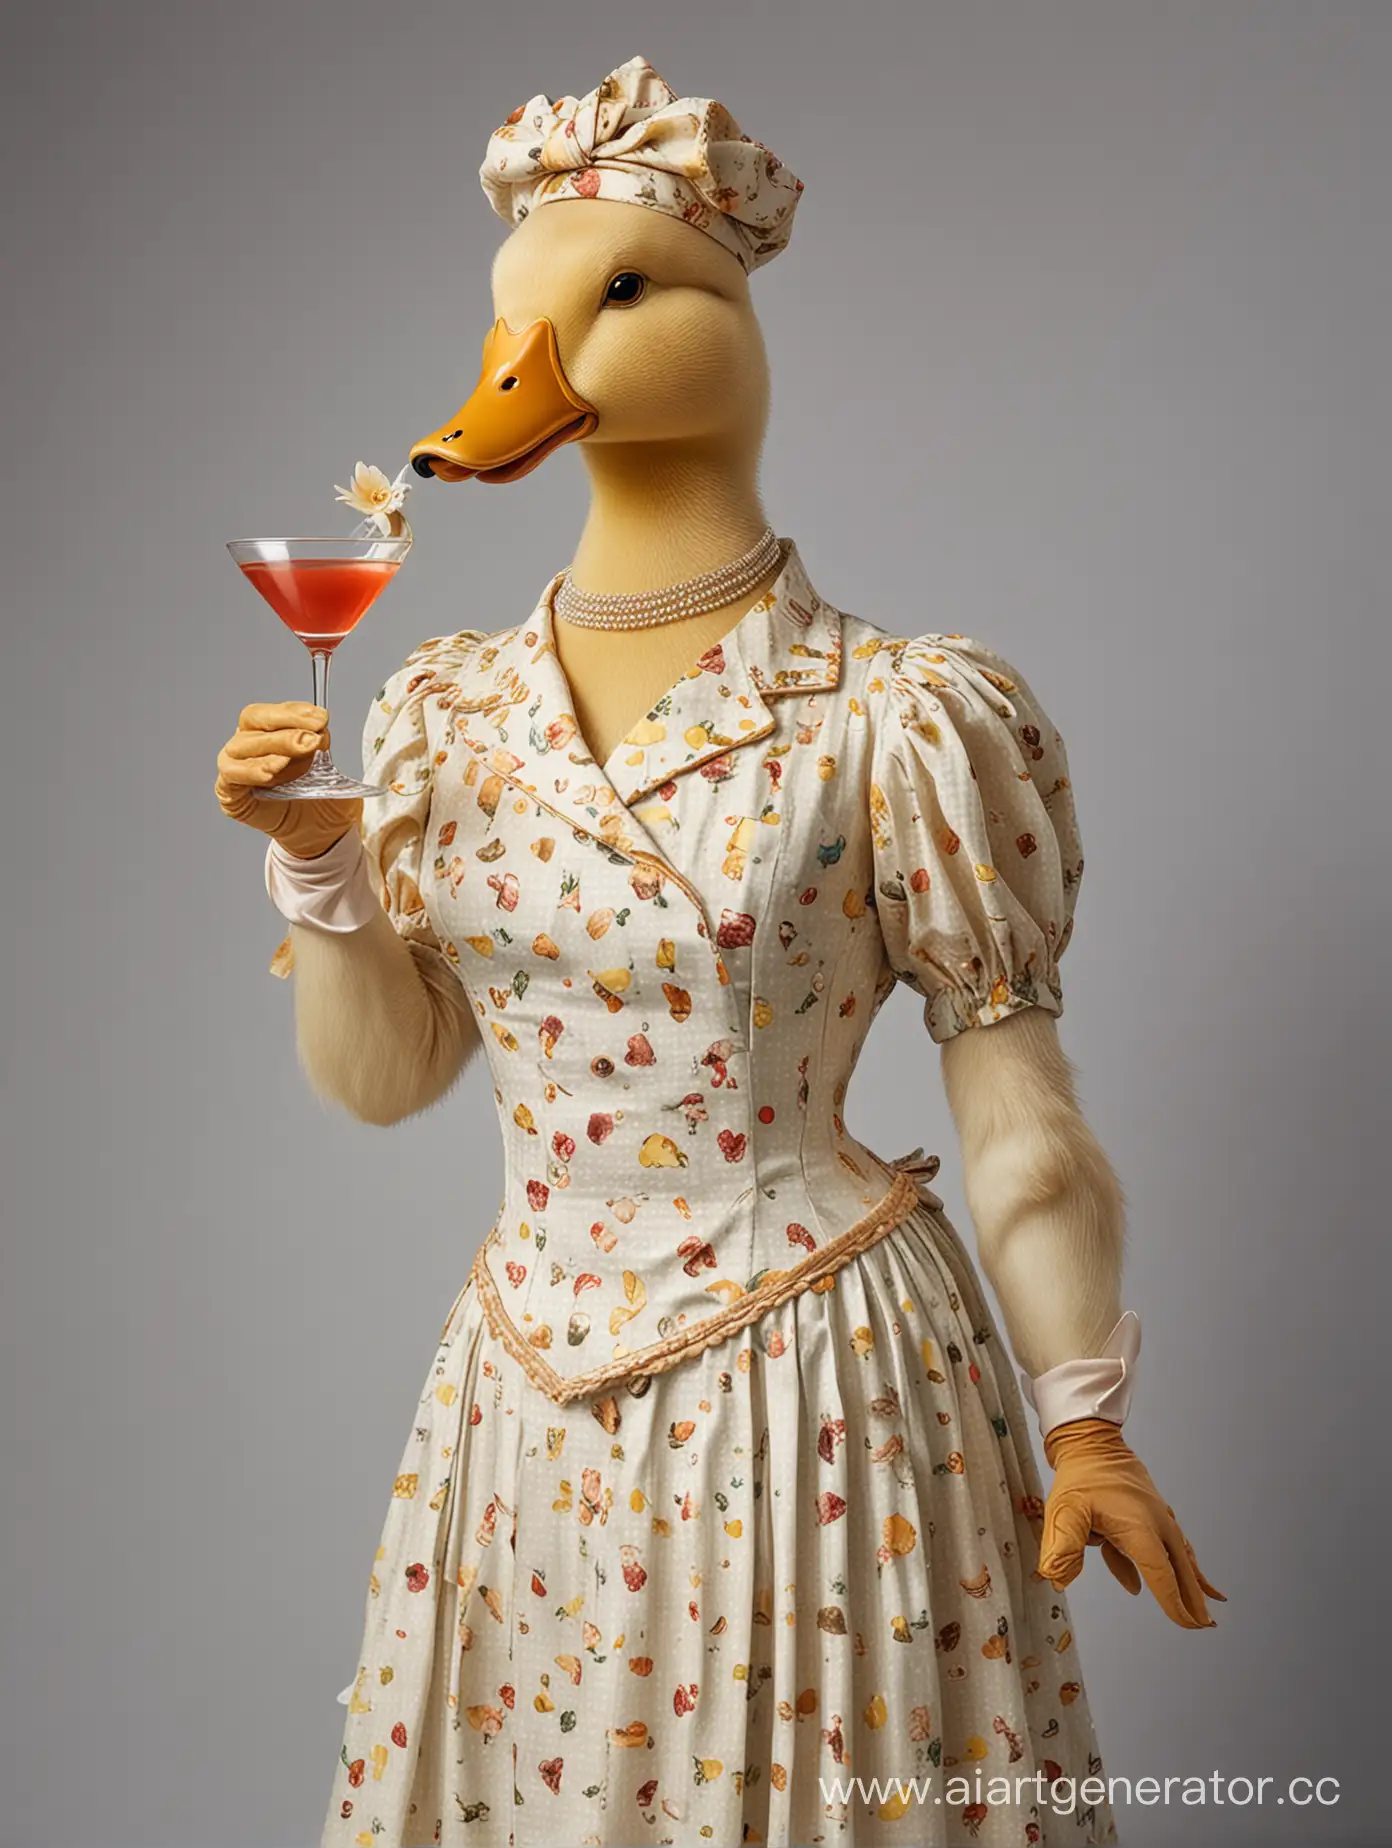 Fashionable-Duck-Holding-Cocktail-Glass